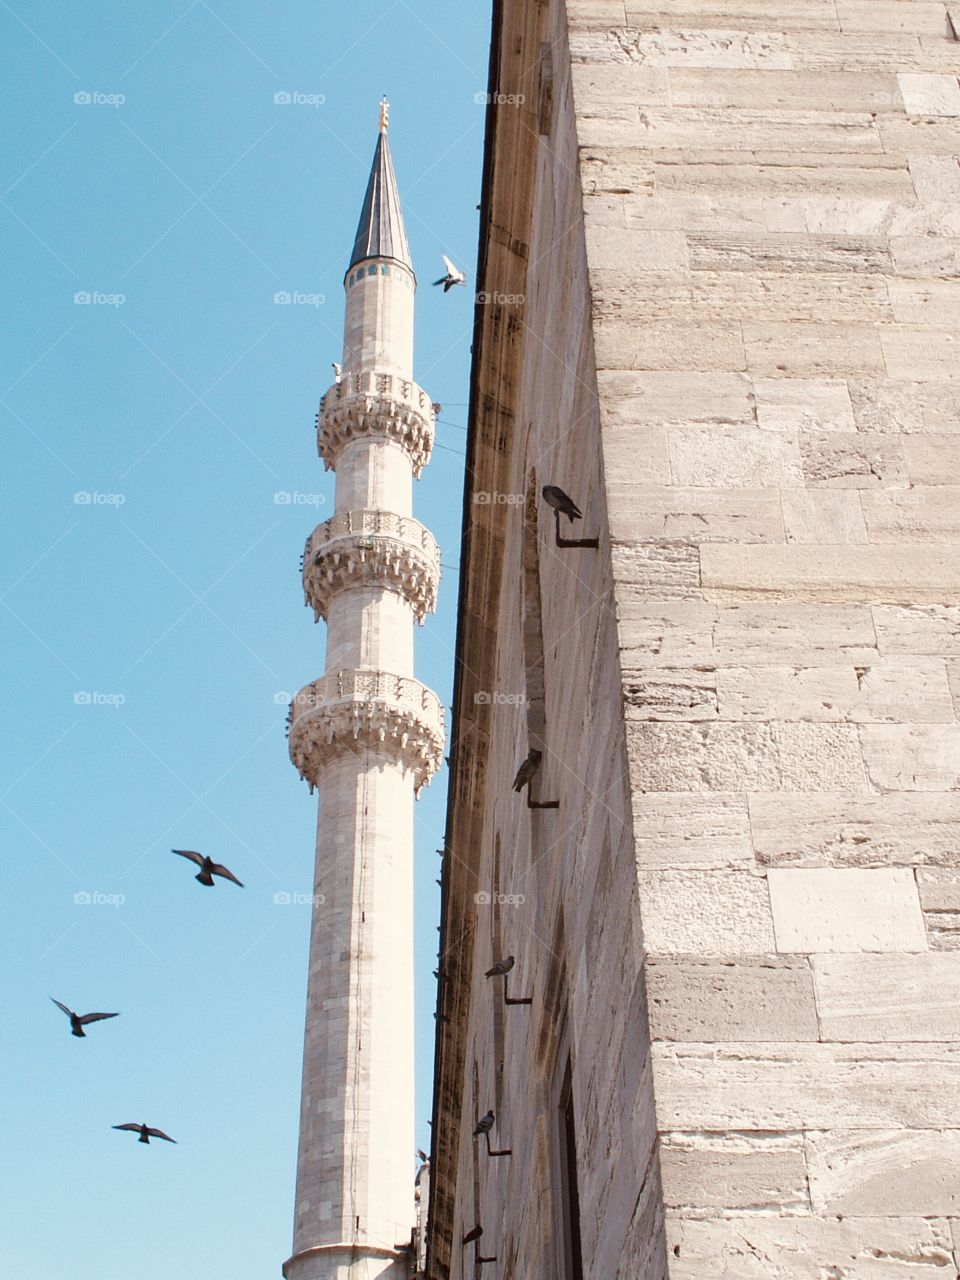 Interesting side view of Blue Mosque in Istanbul